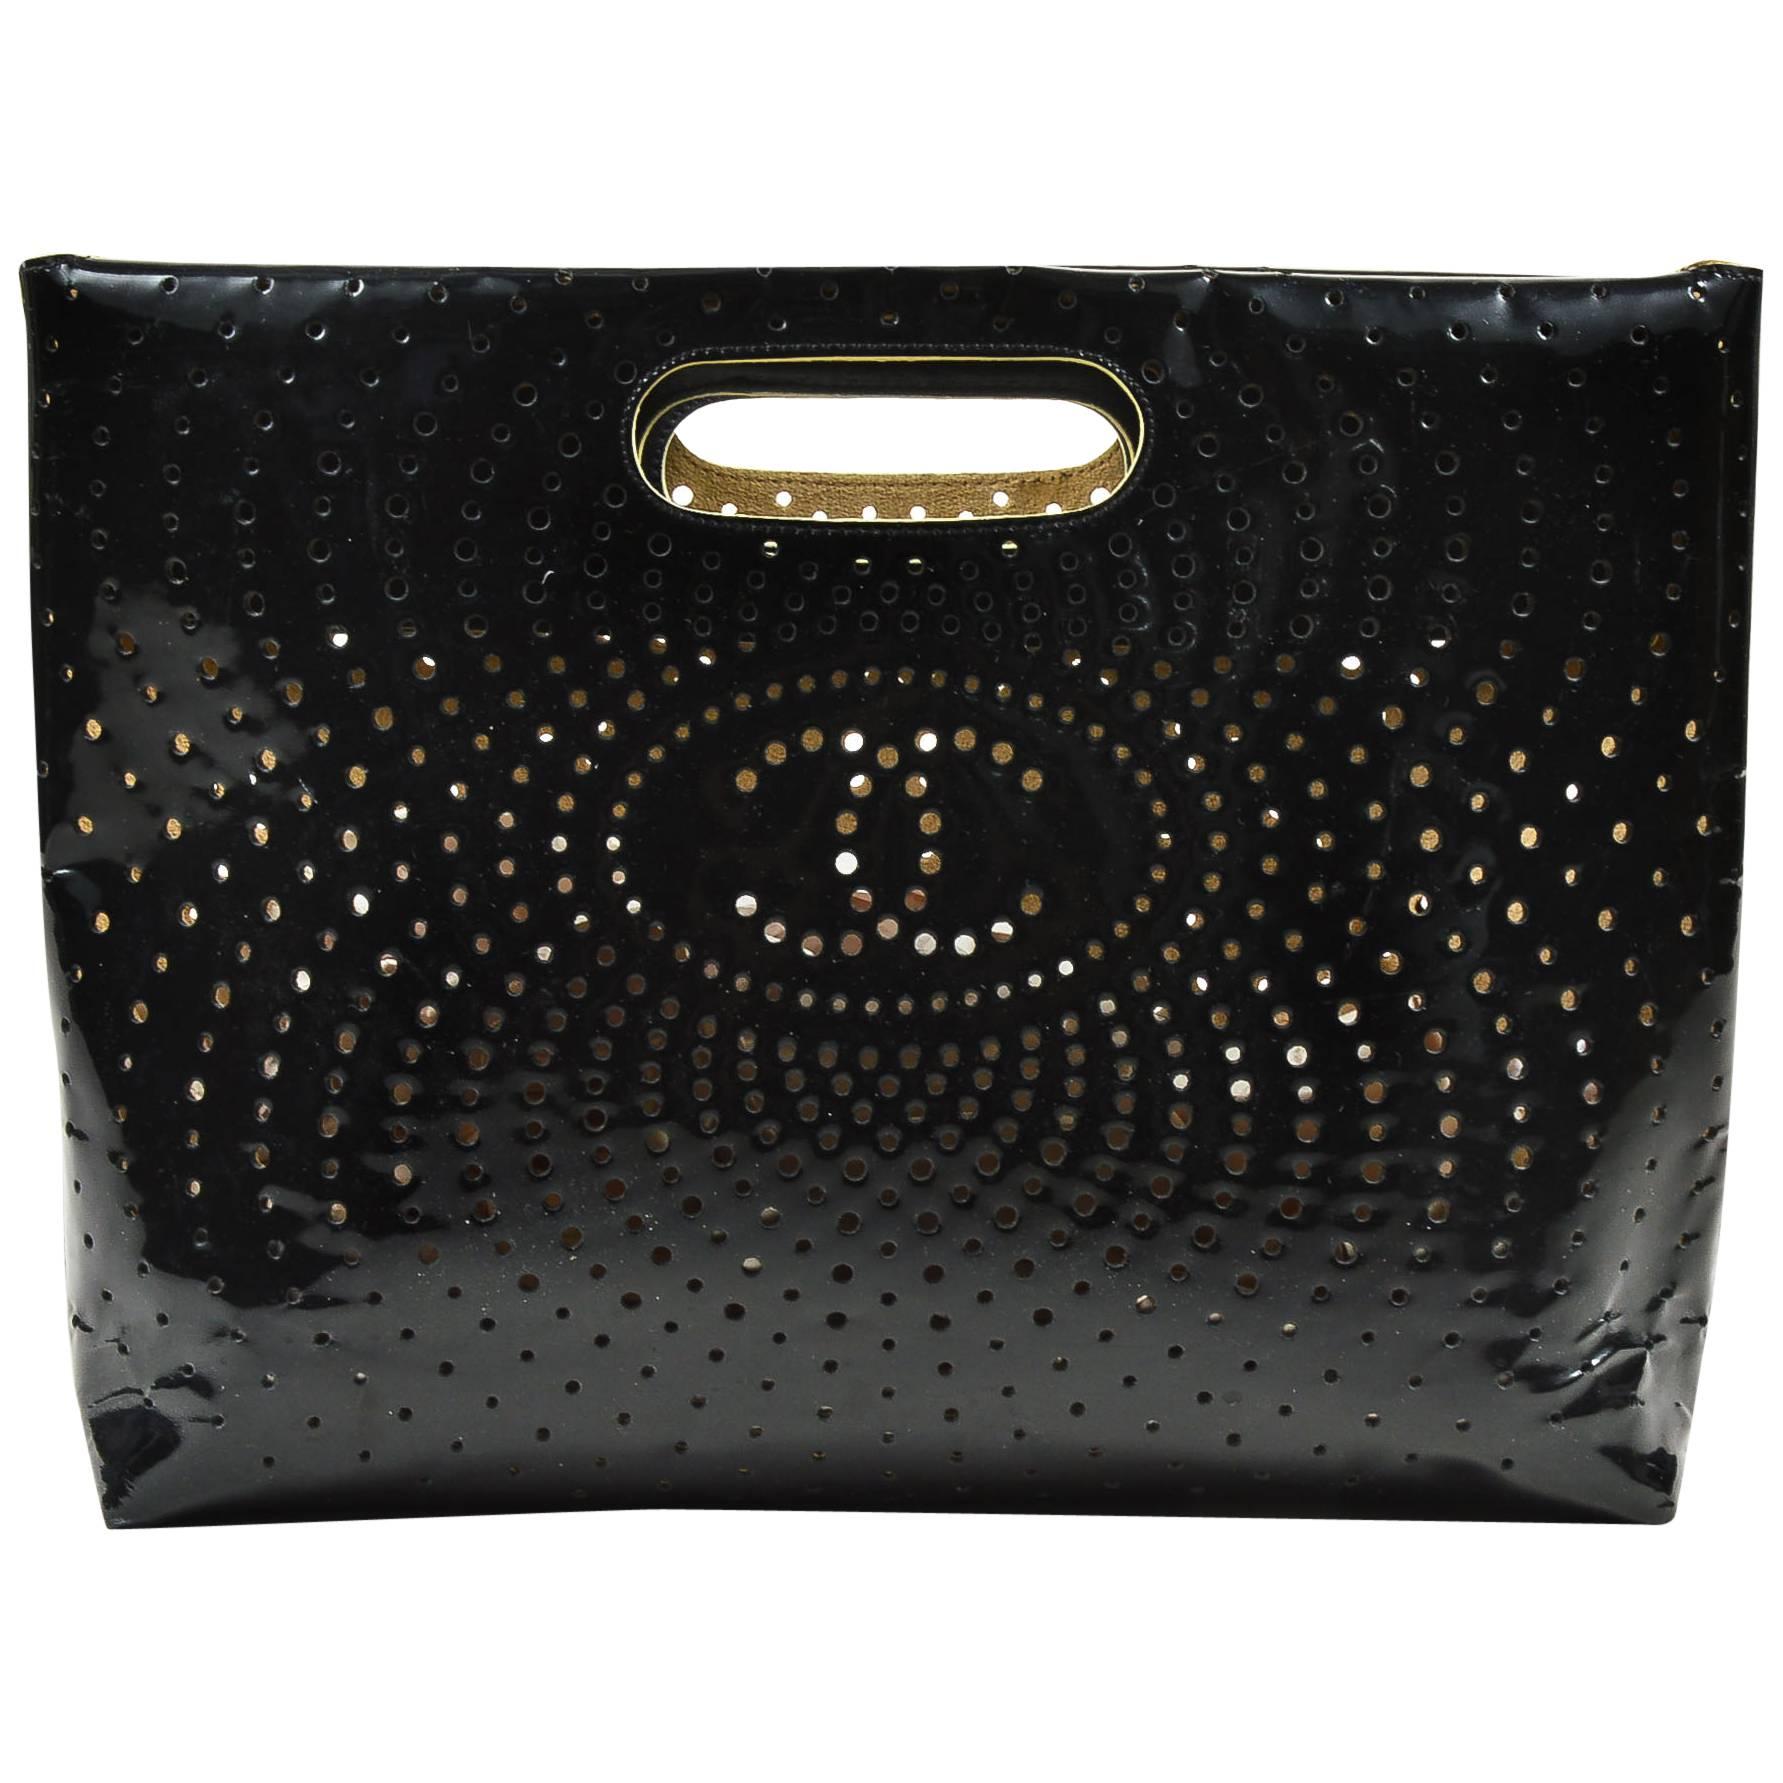 Chanel Black Perforated Patent Leather 'CC' Logo Clutch Handbag For Sale